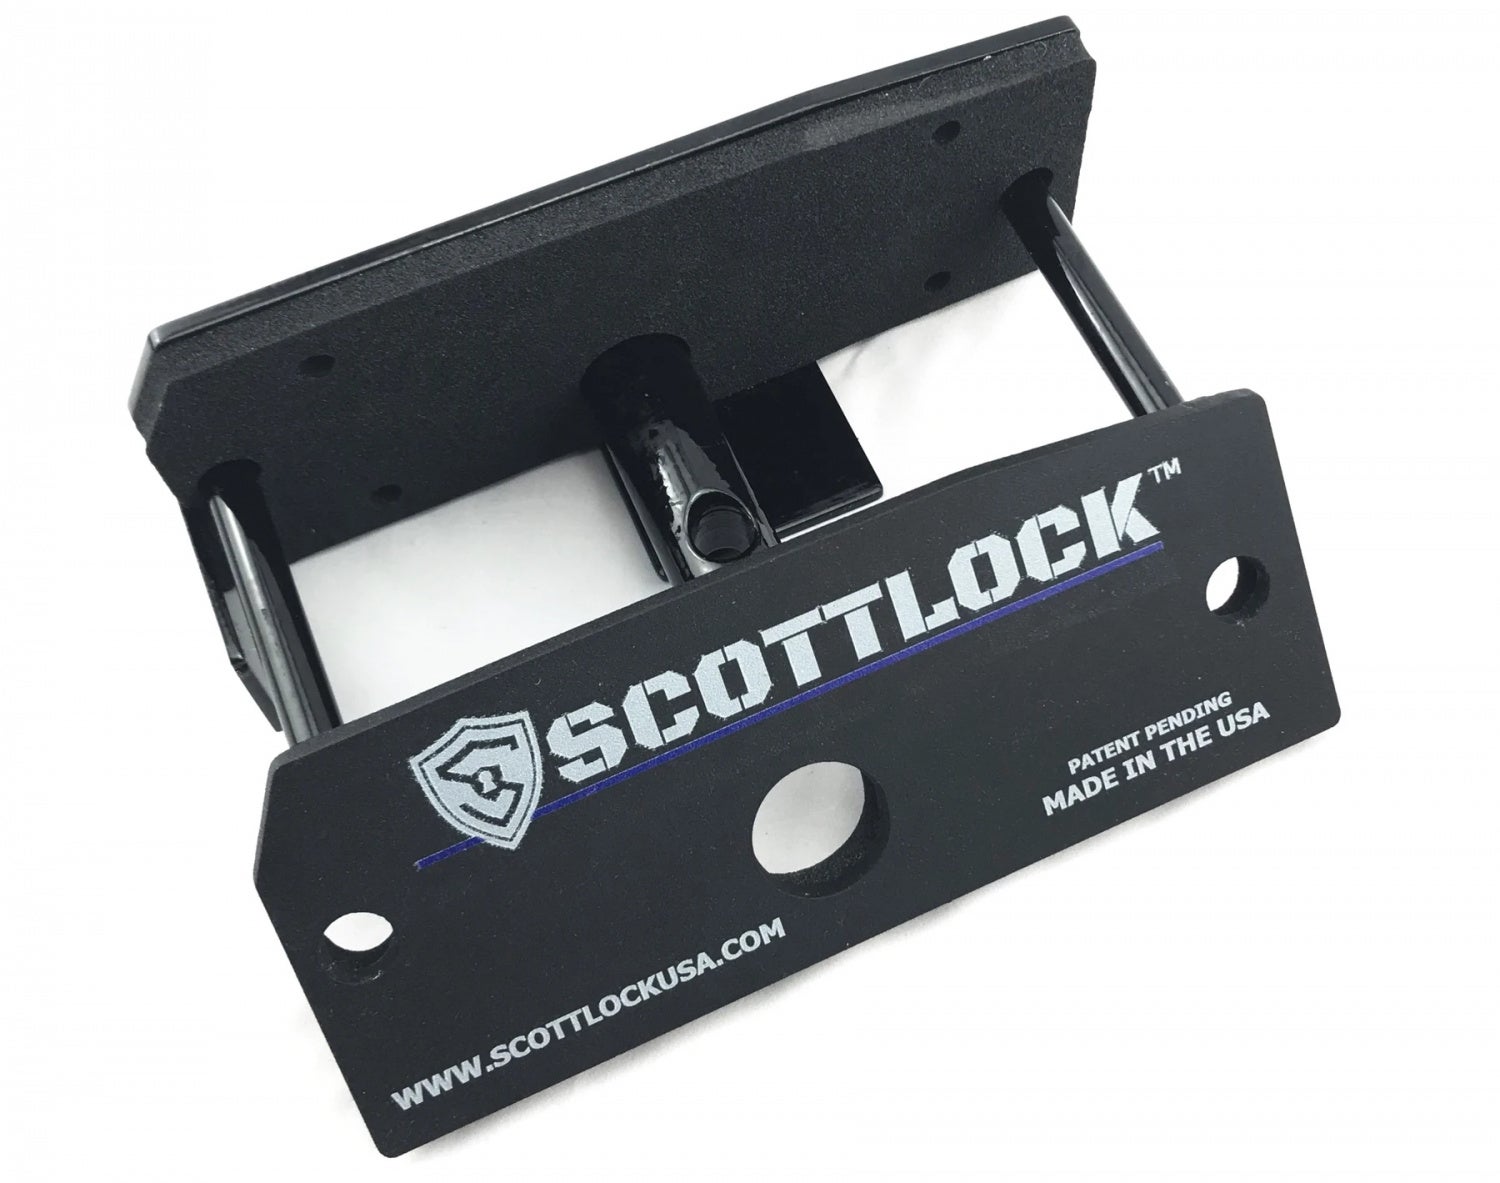 SCOTTLOCK - A Robust and Portable AR-15 Rifle Retention System